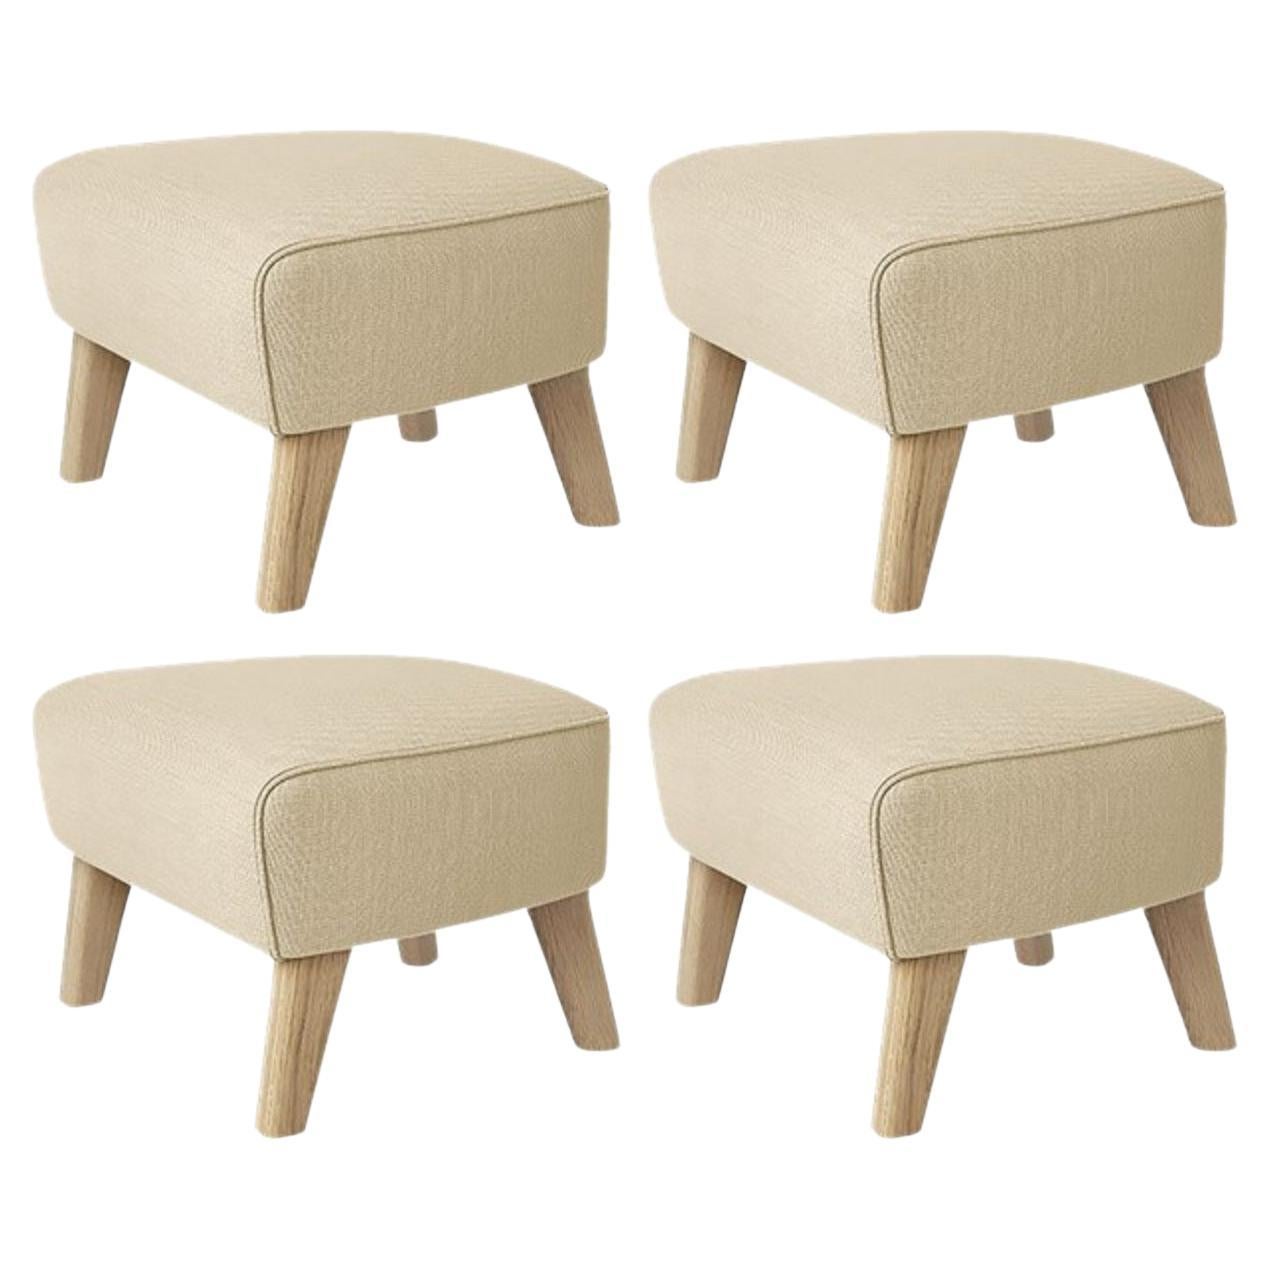 Set of 4 Sand and Natural Oak Sahco Zero Footstool by Lassen